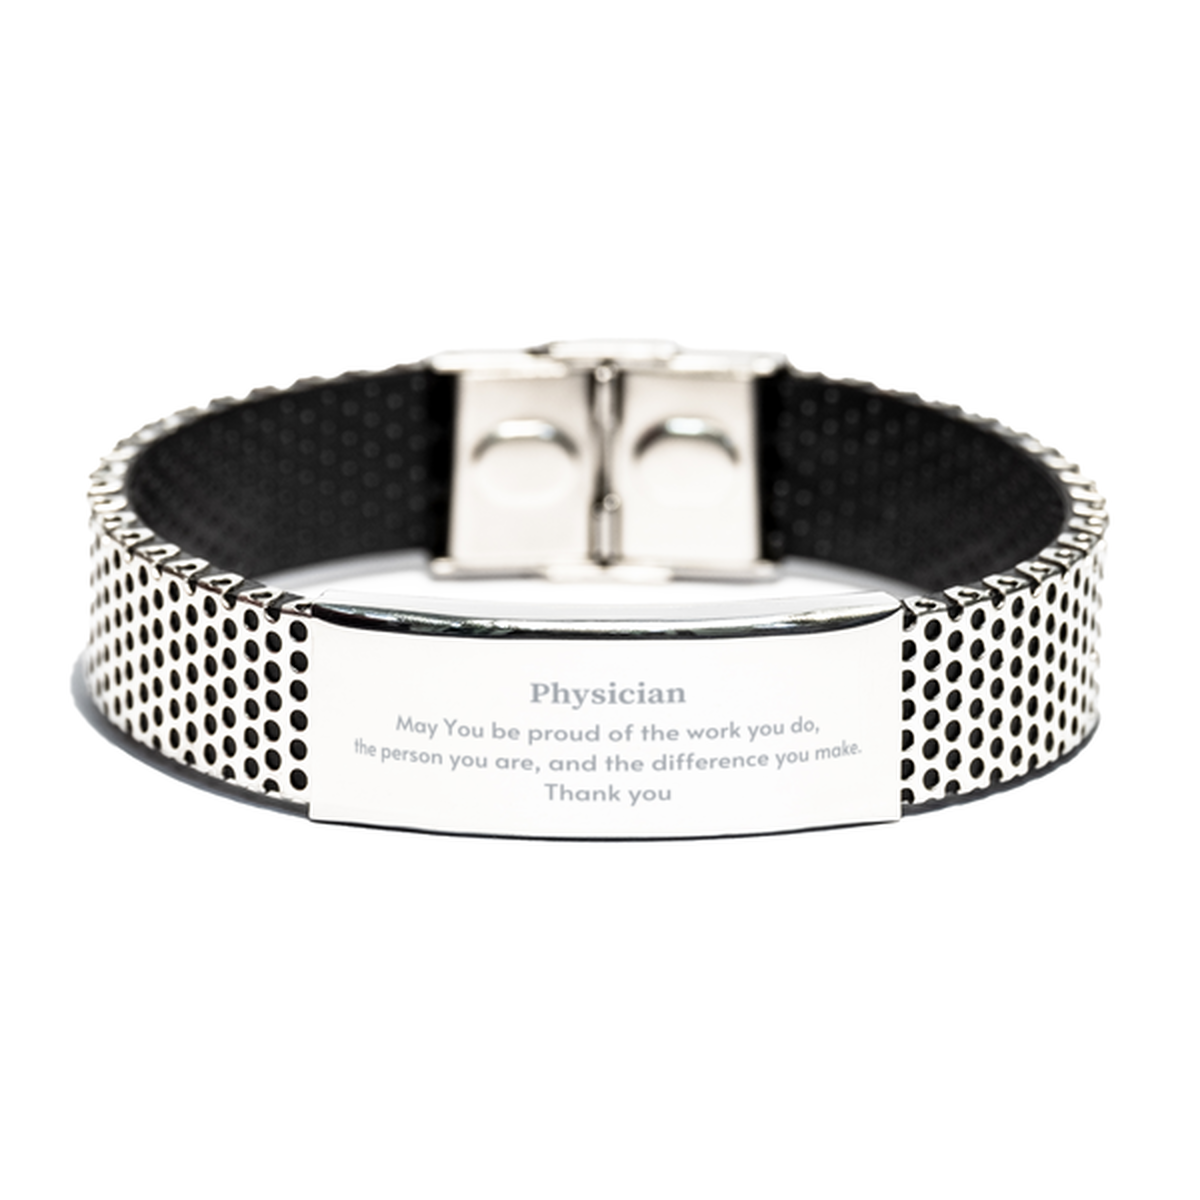 Heartwarming Stainless Steel Bracelet Retirement Coworkers Gifts for Physician, Physician May You be proud of the work you do, the person you are Gifts for Boss Men Women Friends